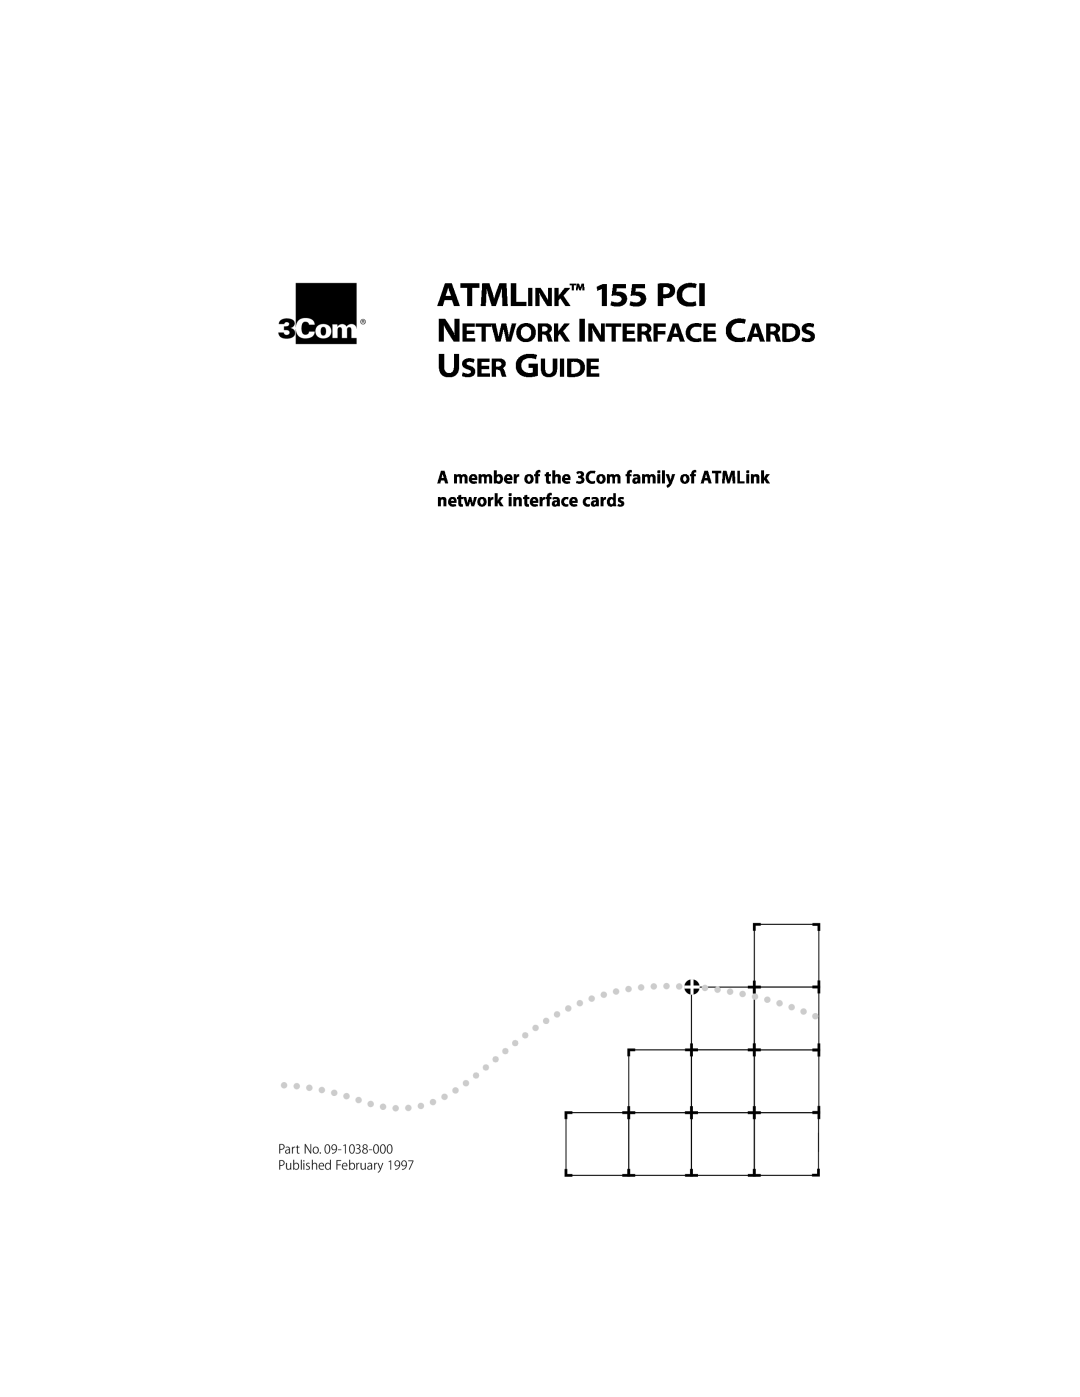 3Com manual Network Interface Cards User Guide, ATMLINK 155 PCI, Published February 